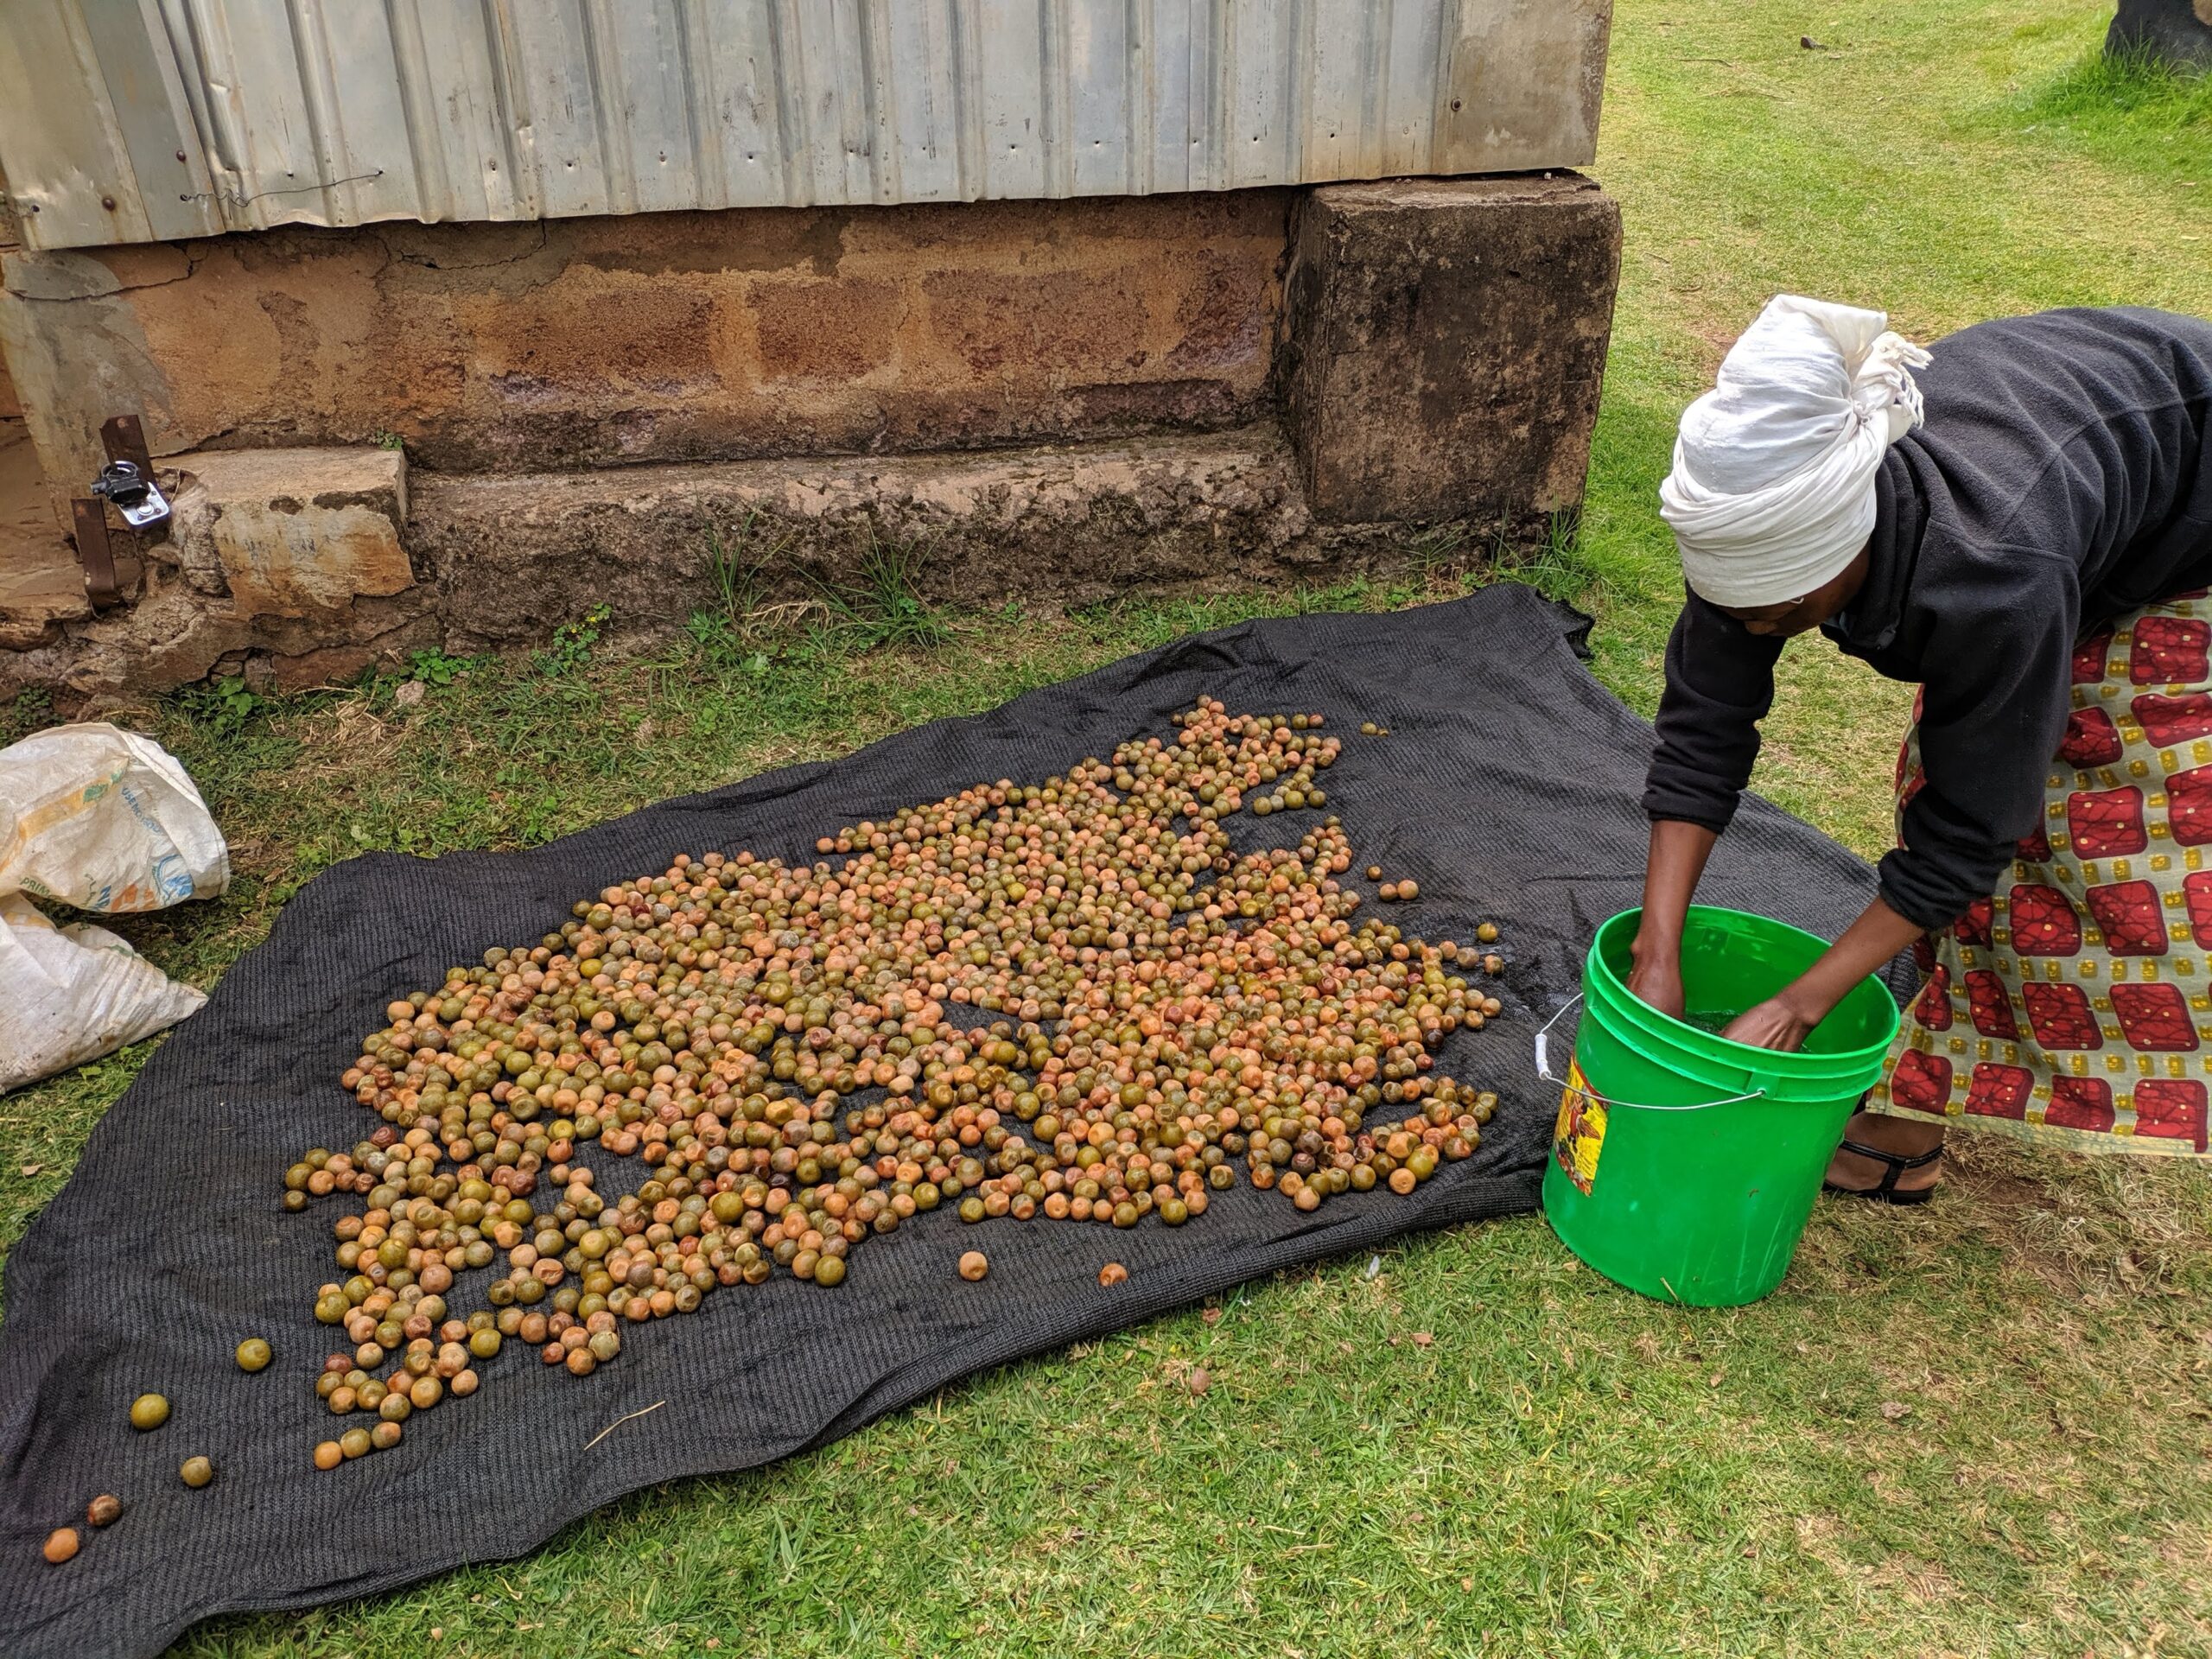 Preparing mbula for infusion, indigenous plum/olive-like fruit in Northern Tanzania. Fruit on tarp, worker pulling fruit out of green bucket.